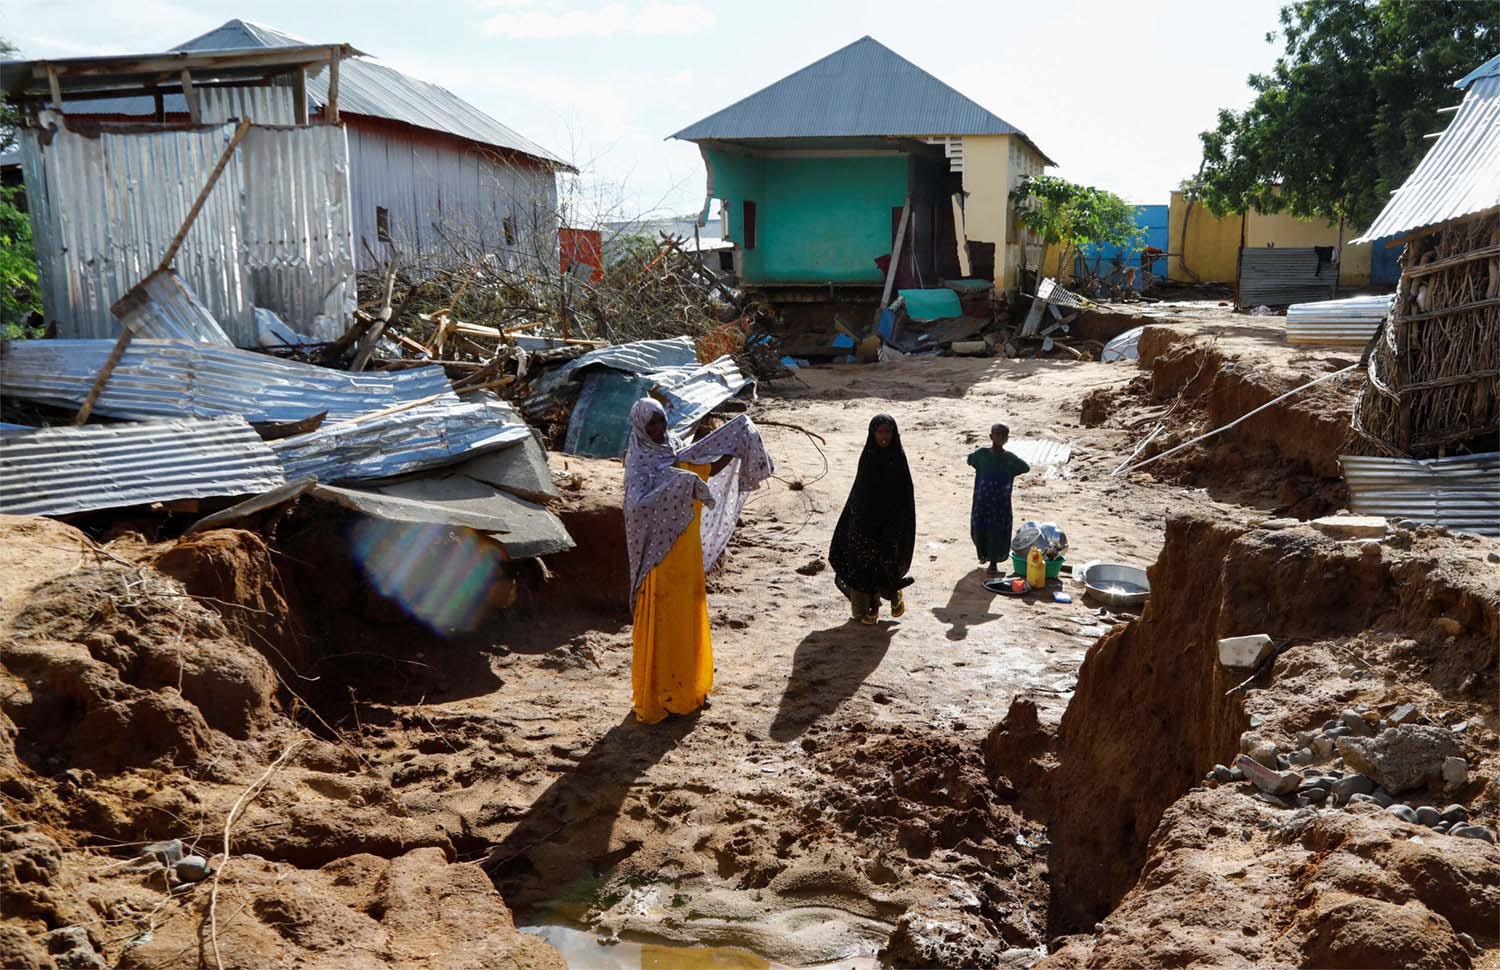 The floods have already killed at least 32 people and forced more than 456,800 from their homes in Somalia